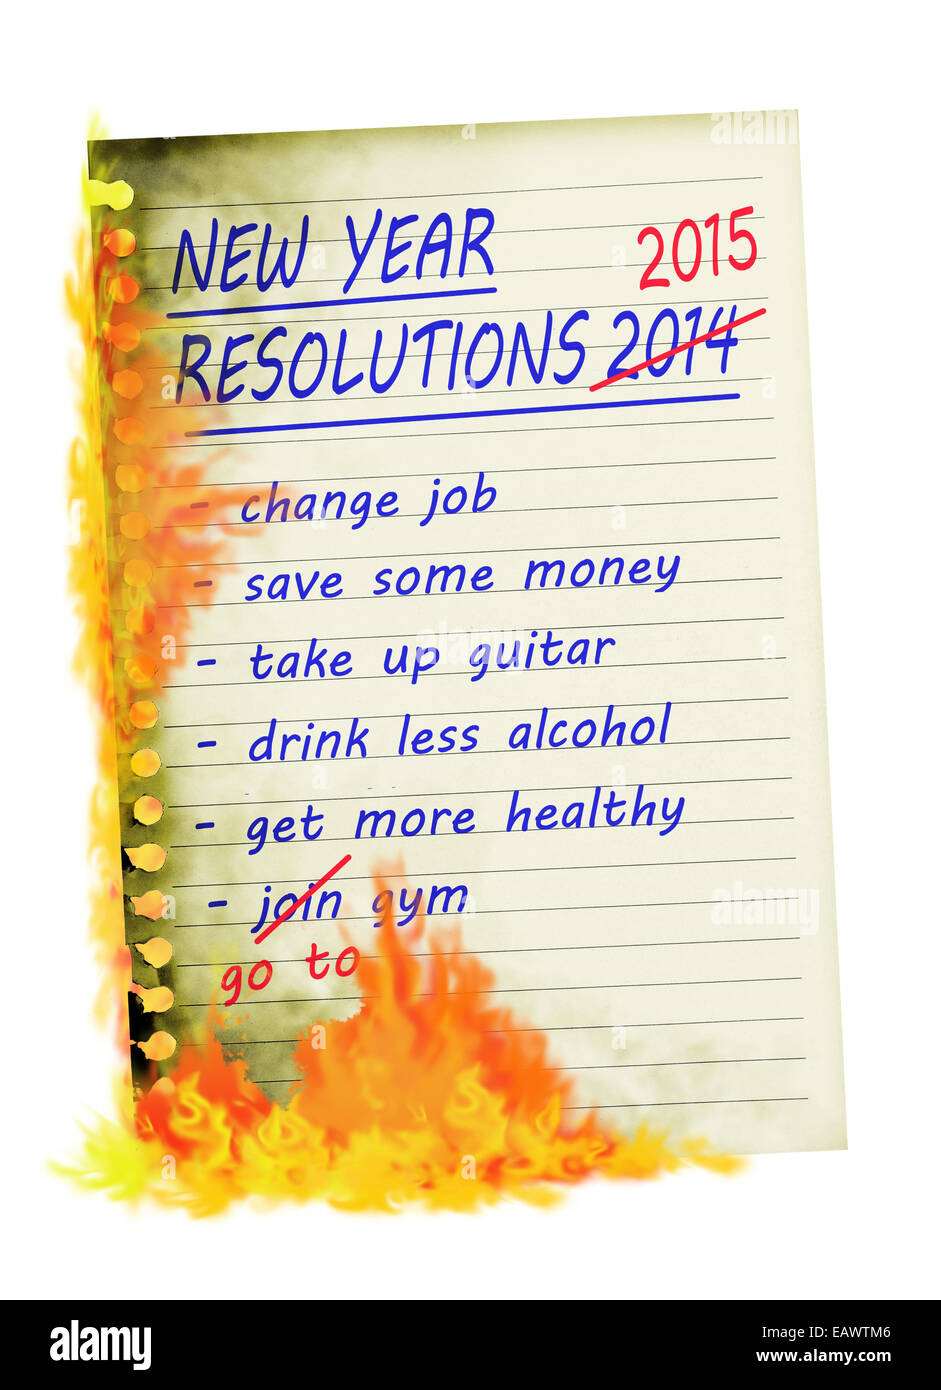 New Year resolutions up in smoke! Again! Stock Photo